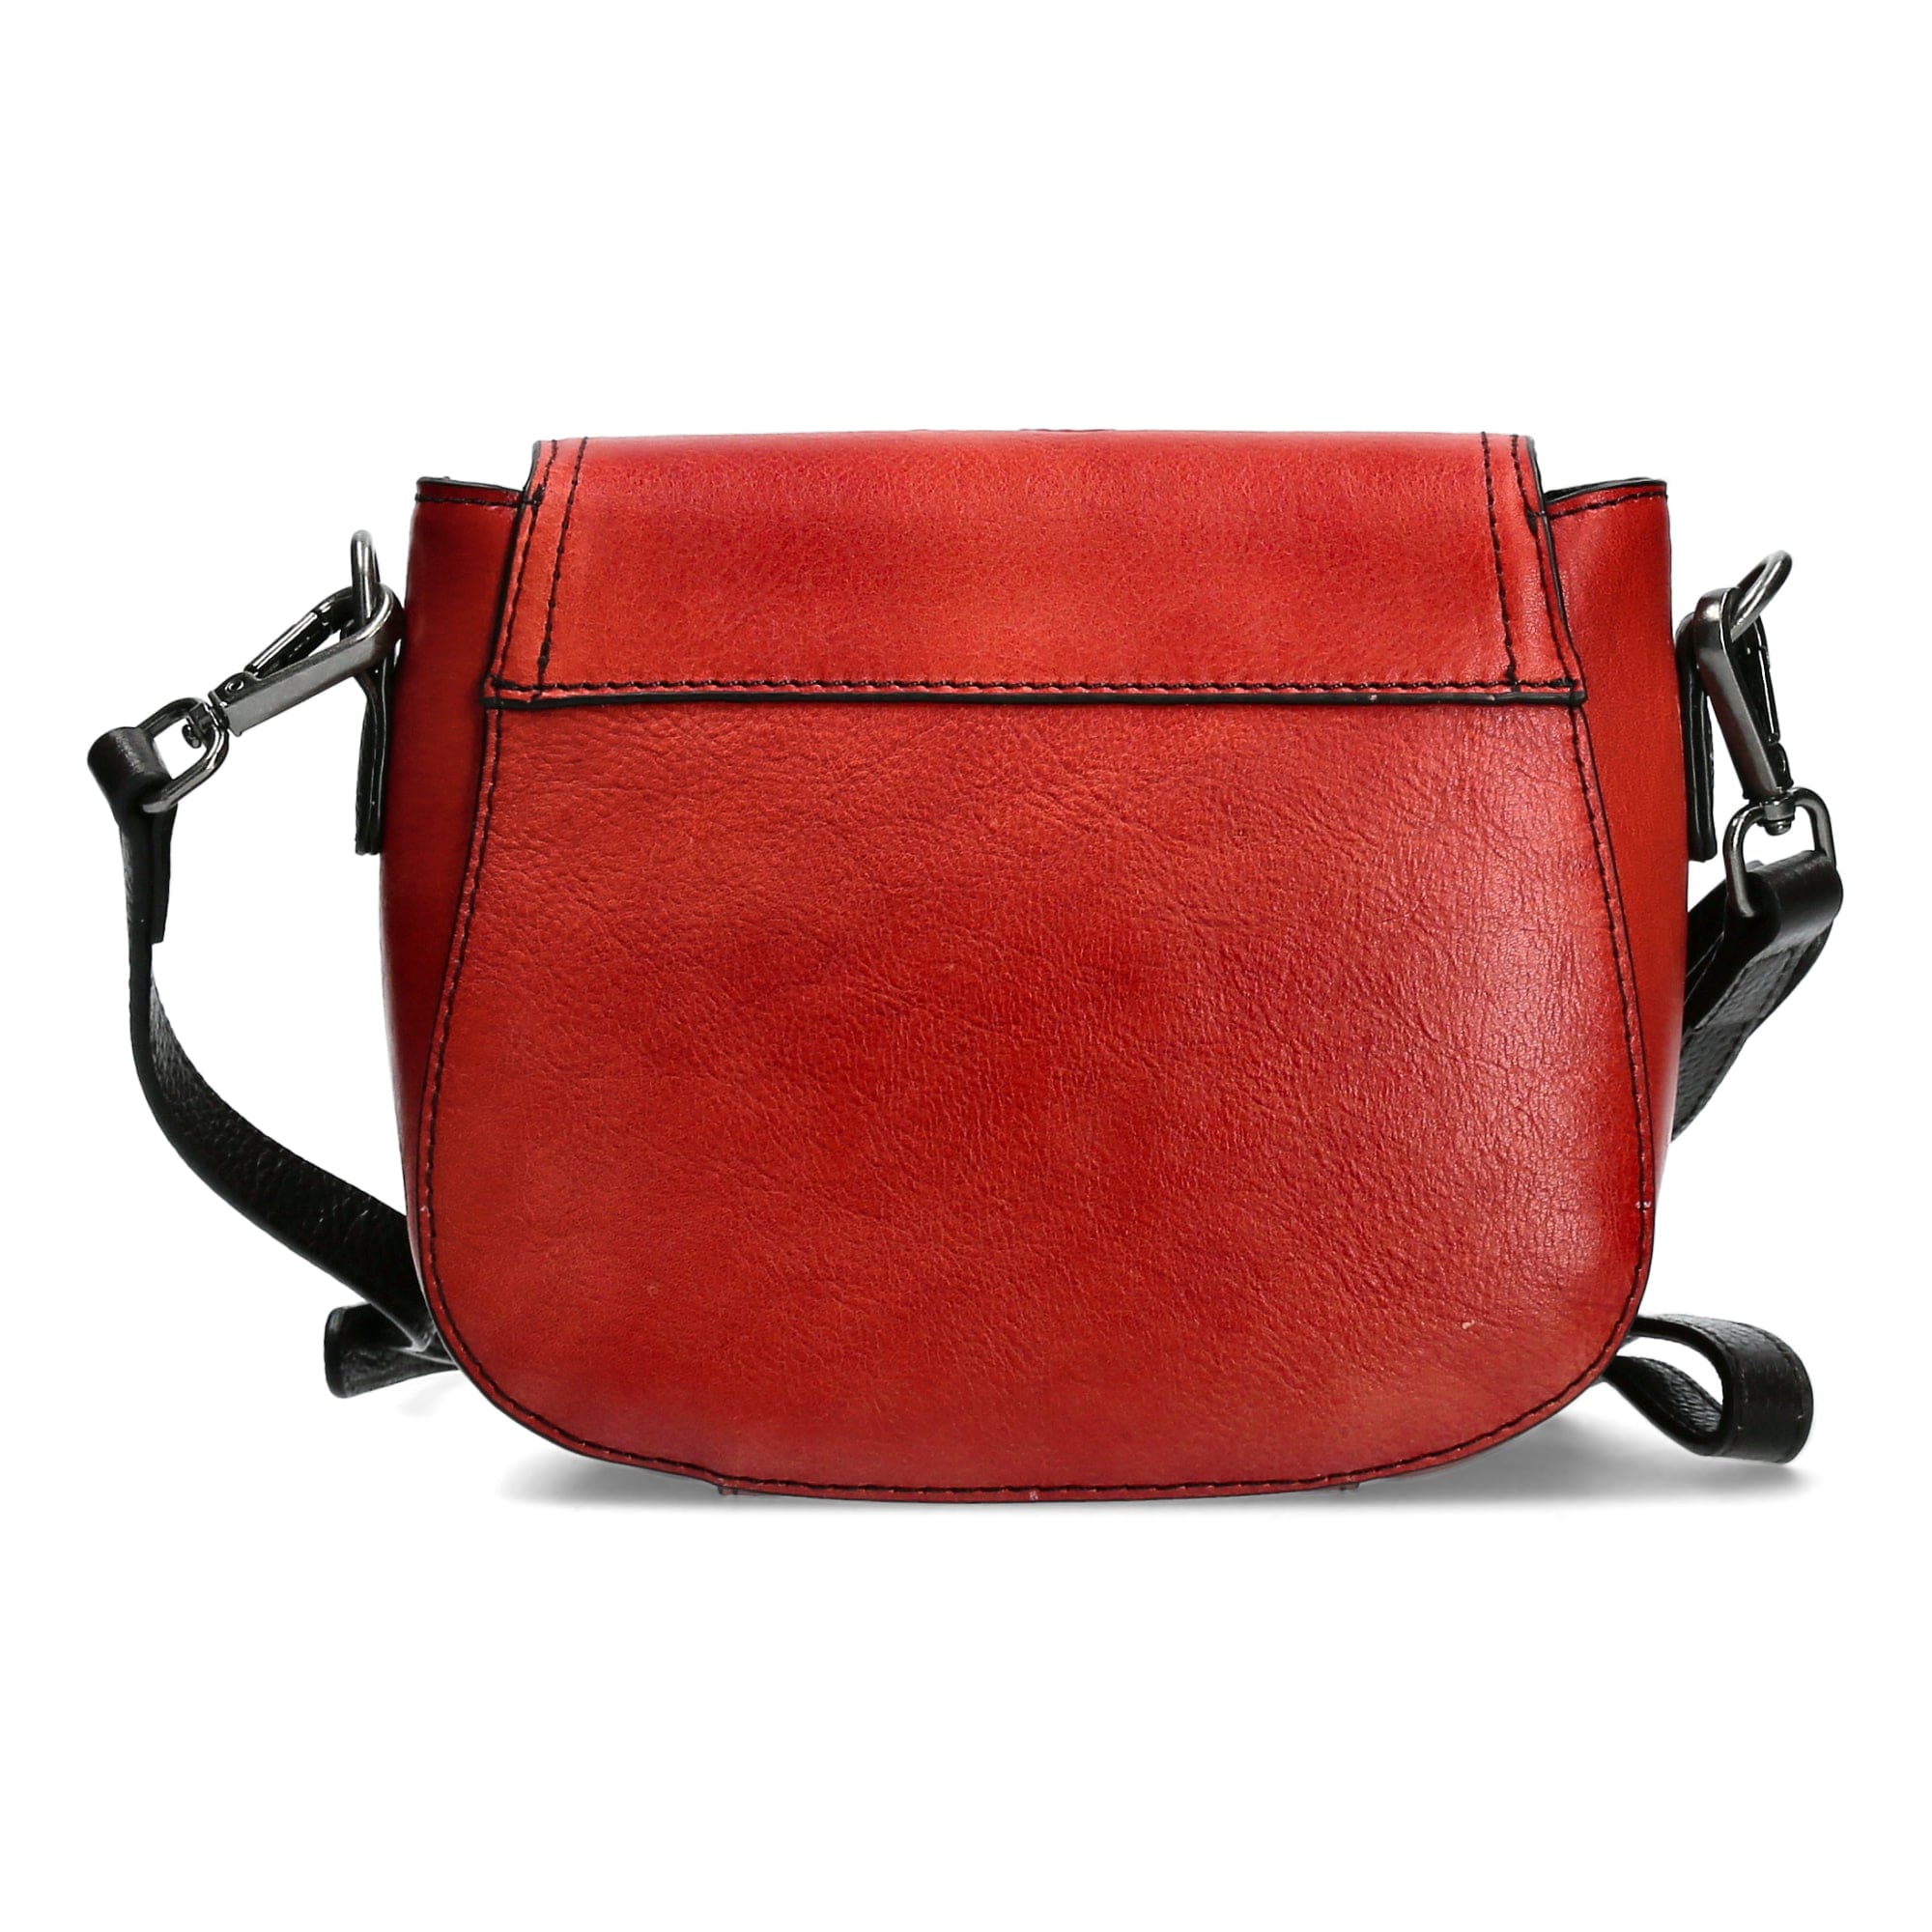 Nelly Exclusivity leather bag - Bag